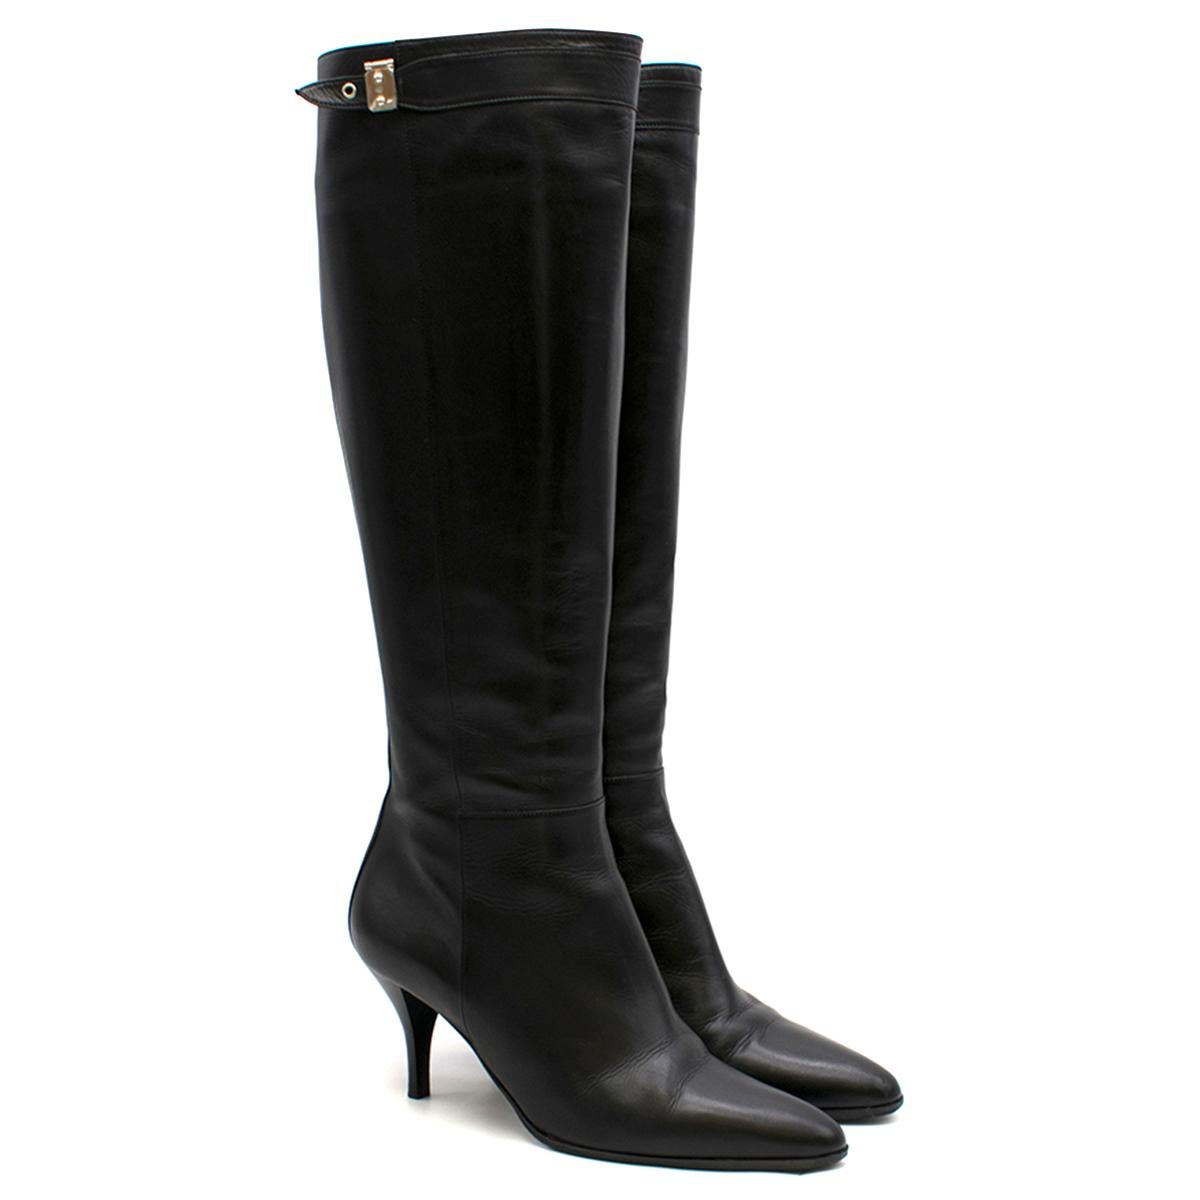 Hermes Black Leather Point-toe Heeled Long Boots

- Black long boots
- Low stiletto heels
- Leather sole and lining
- Silver padlock-effect plaque on decorative seamed strap
- Point-toe
- Concealed zip closure at the side

Please note, these items